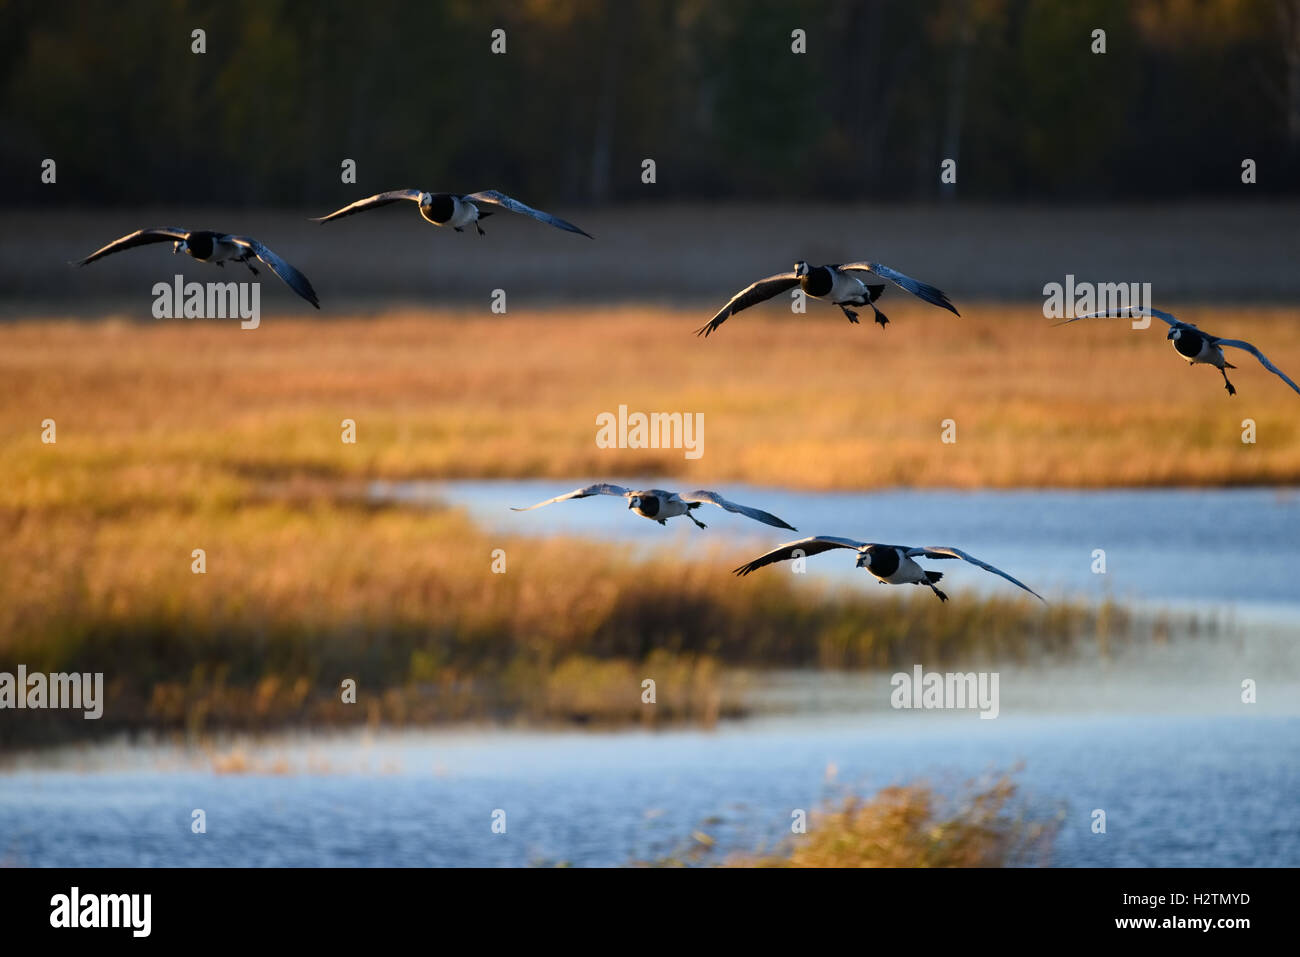 Geese landing over water in Autumn evening light Stock Photo